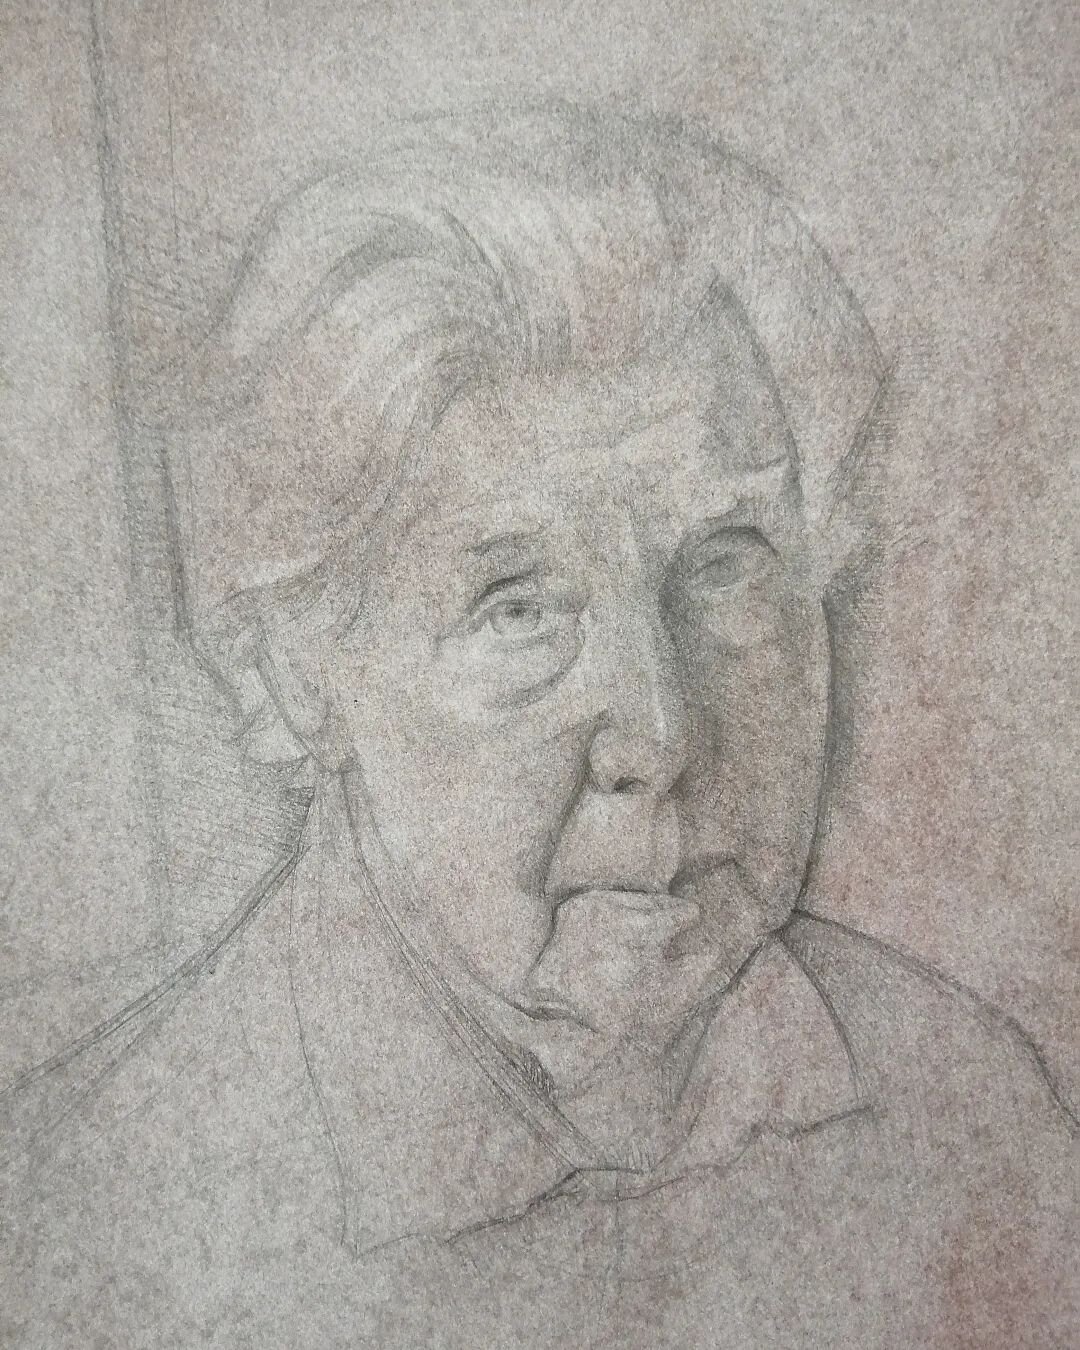 Study for a posthumous portrait of Ronald Blythe 1922 - 2023. Author. 
This is the first step towards a fairly large portrait of Ronald in his study at Bottengoms Farm, his house on the Essex Suffolk border, inherited from his friend the painter John